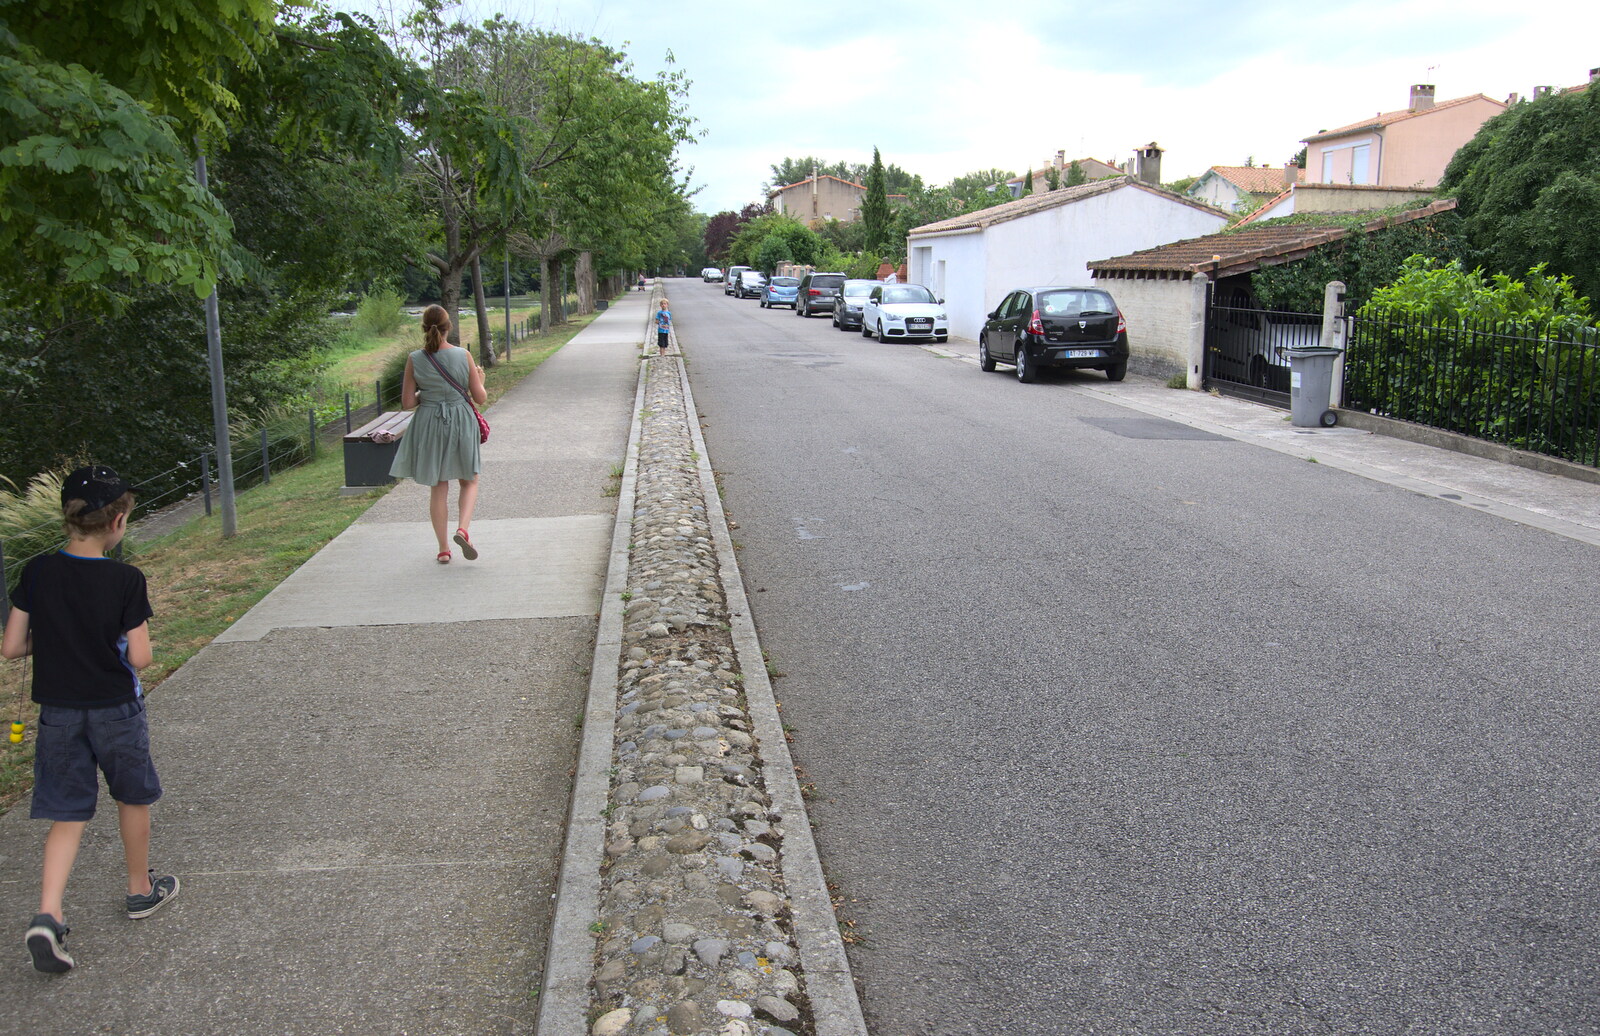 On the street that runs behind the house from The Château Comtal, Lastours and the Journey Home, Carcassonne, Aude, France - 14th August 2018